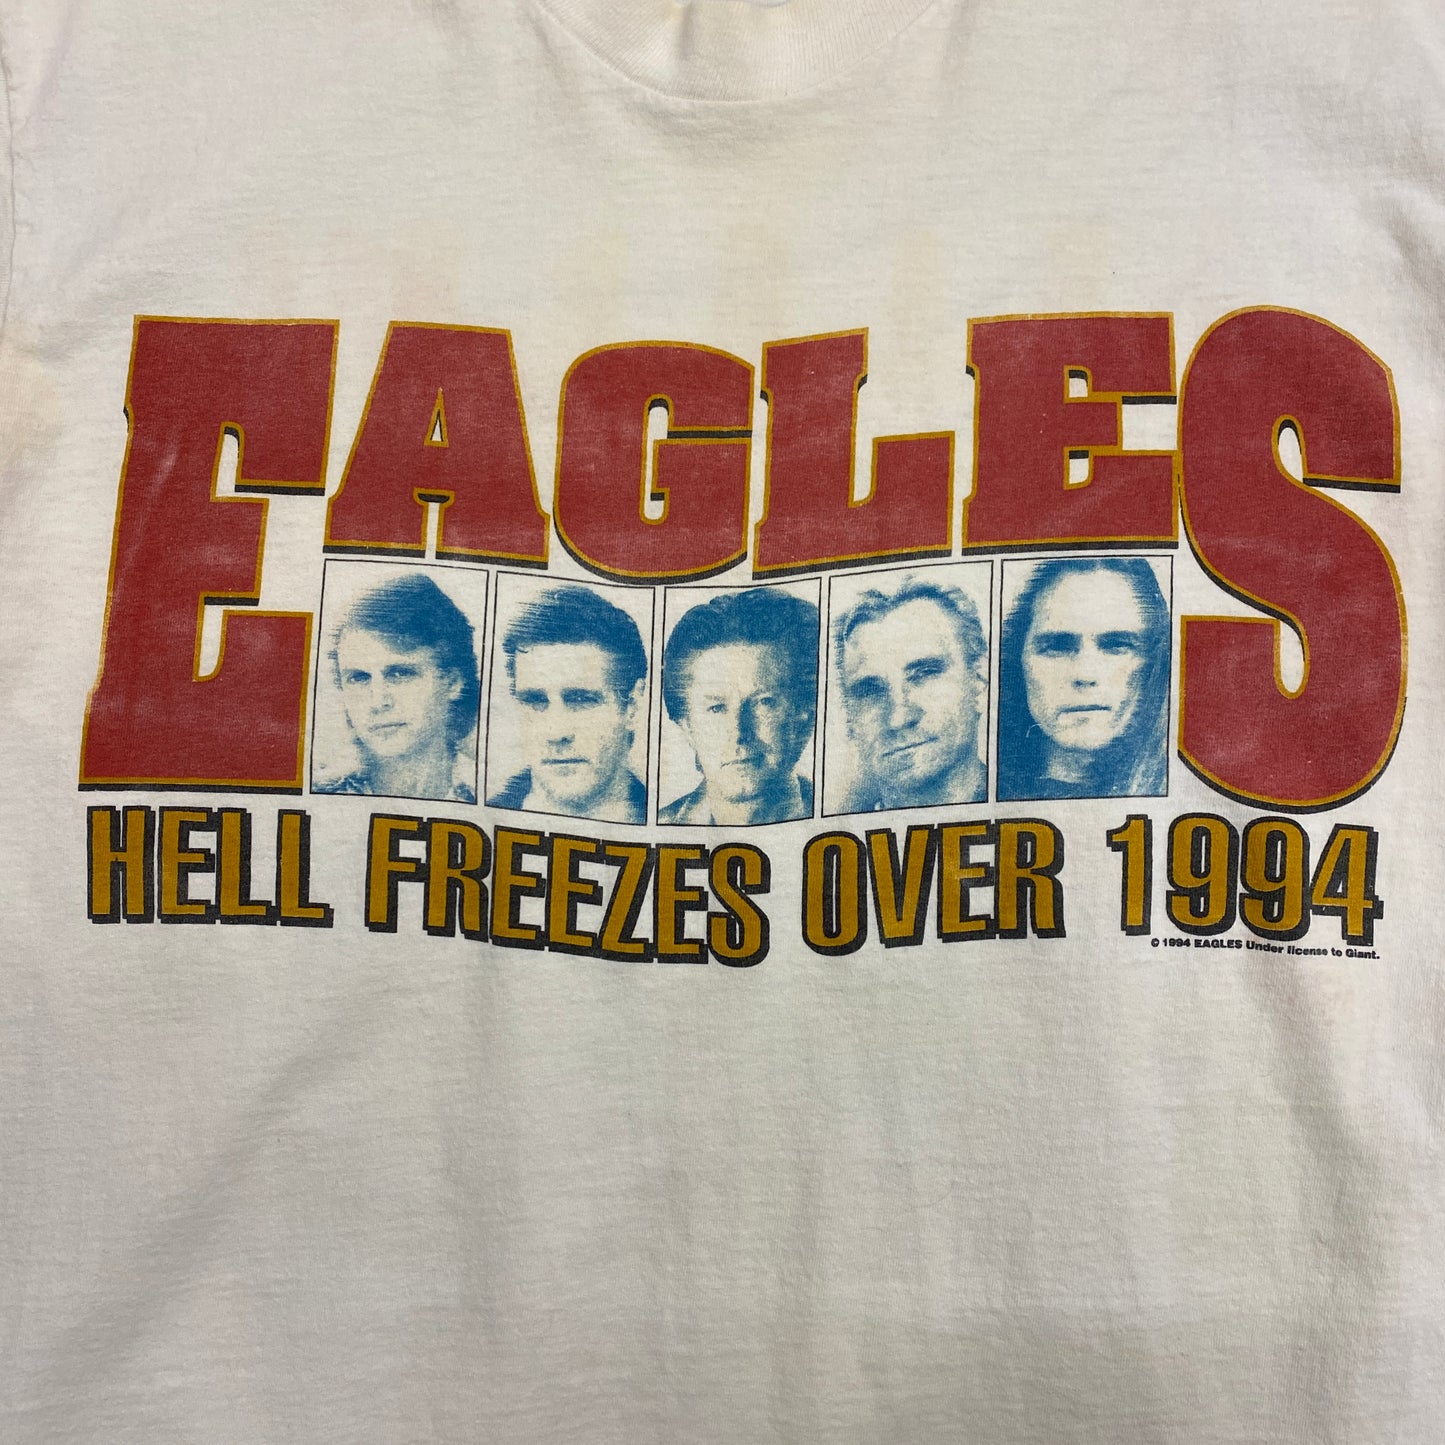 Vintage 1994 Eagles "Hell Freezes Over" Tour Tee - Size Large